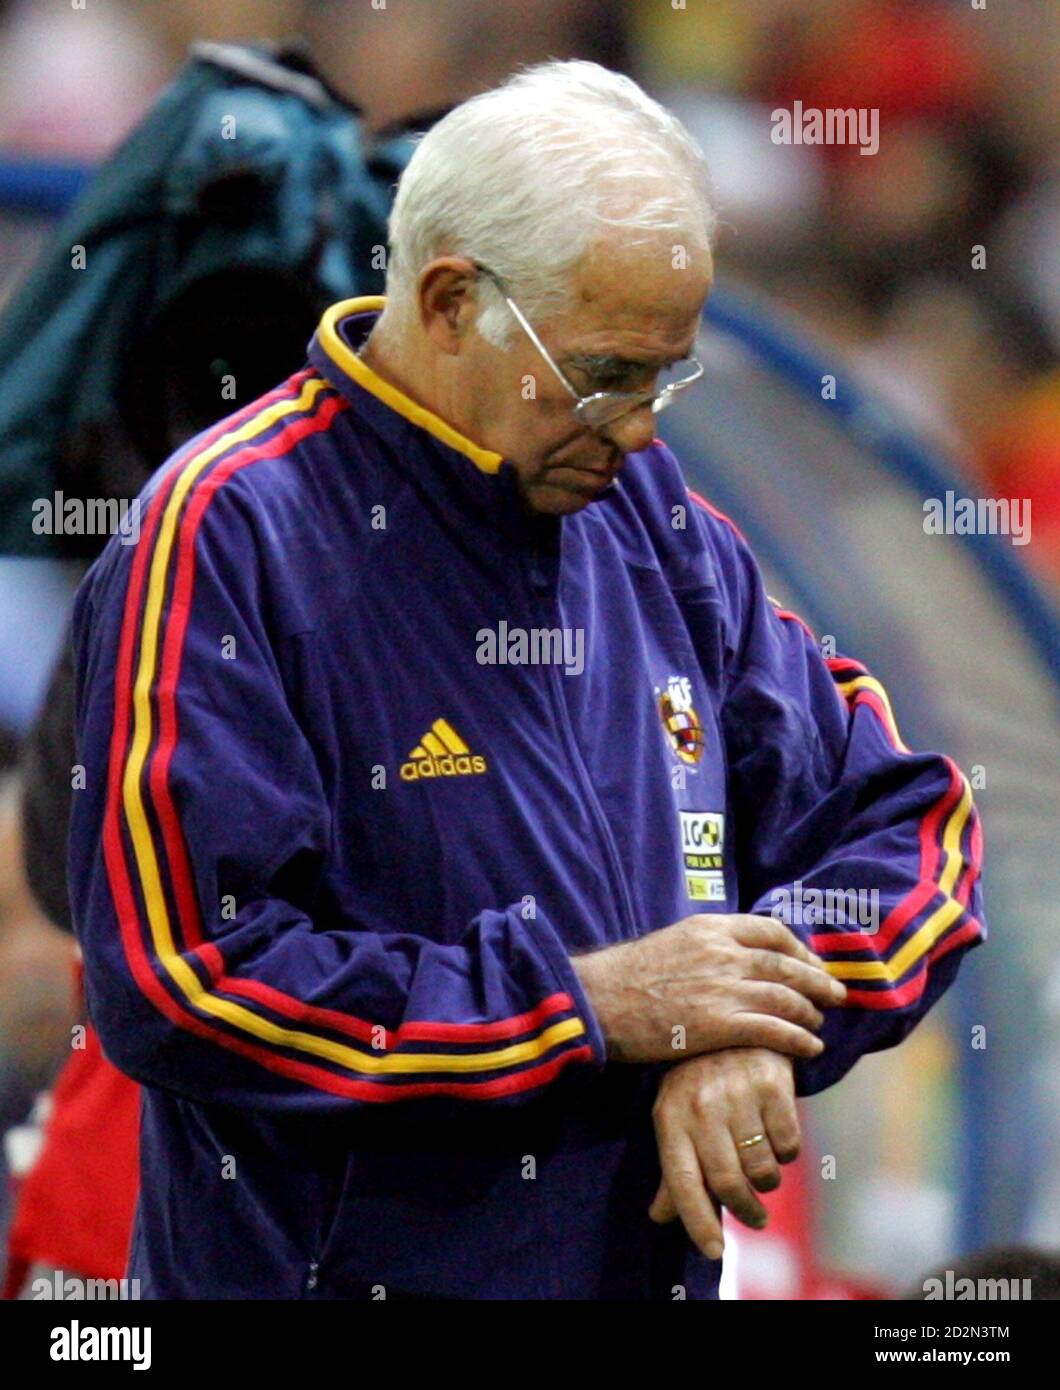 Spains national team coach luis hi-res stock photography and images - Alamy